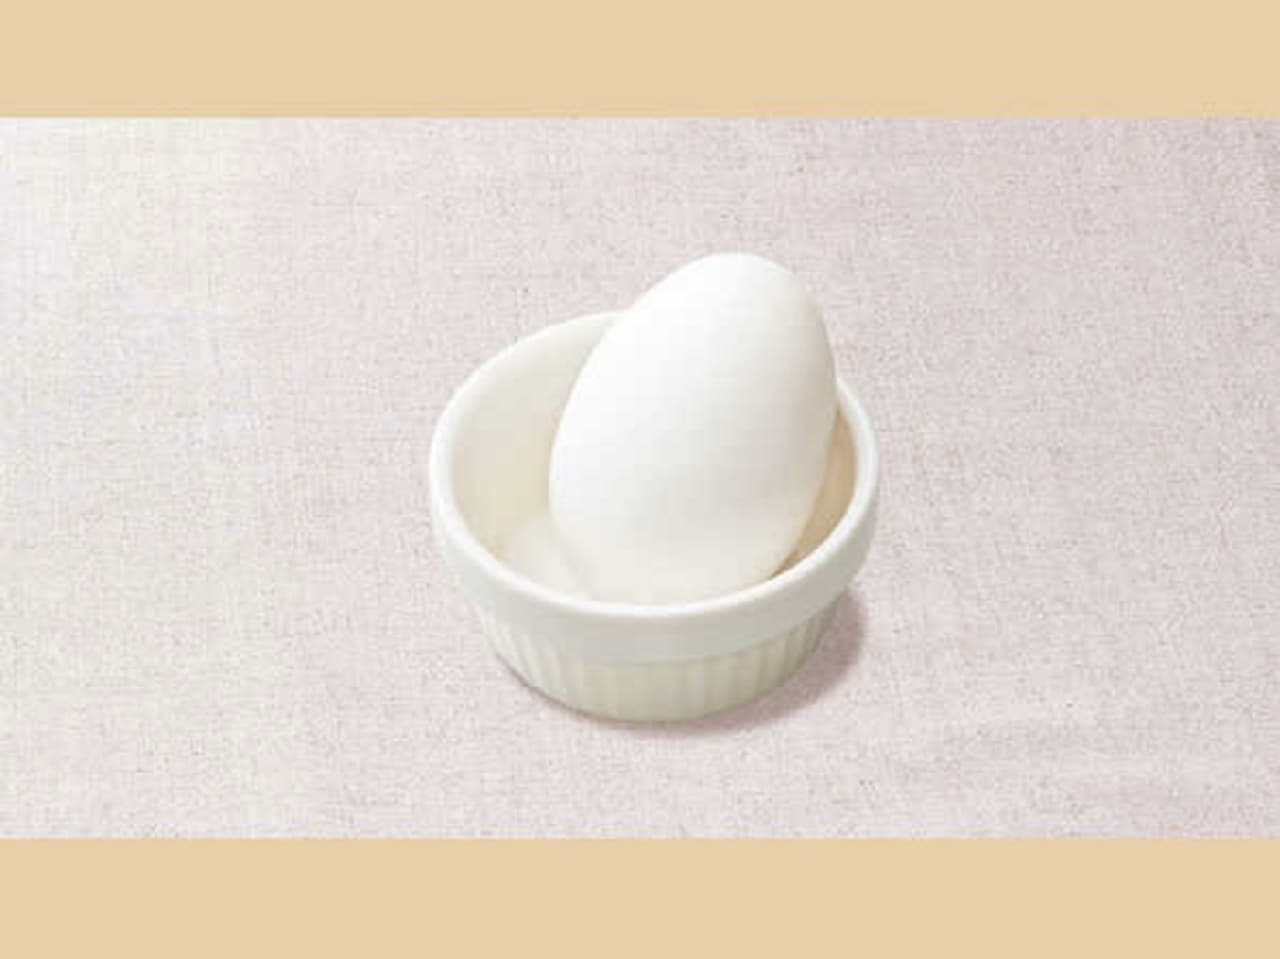 Gusto "Boiled egg with shell